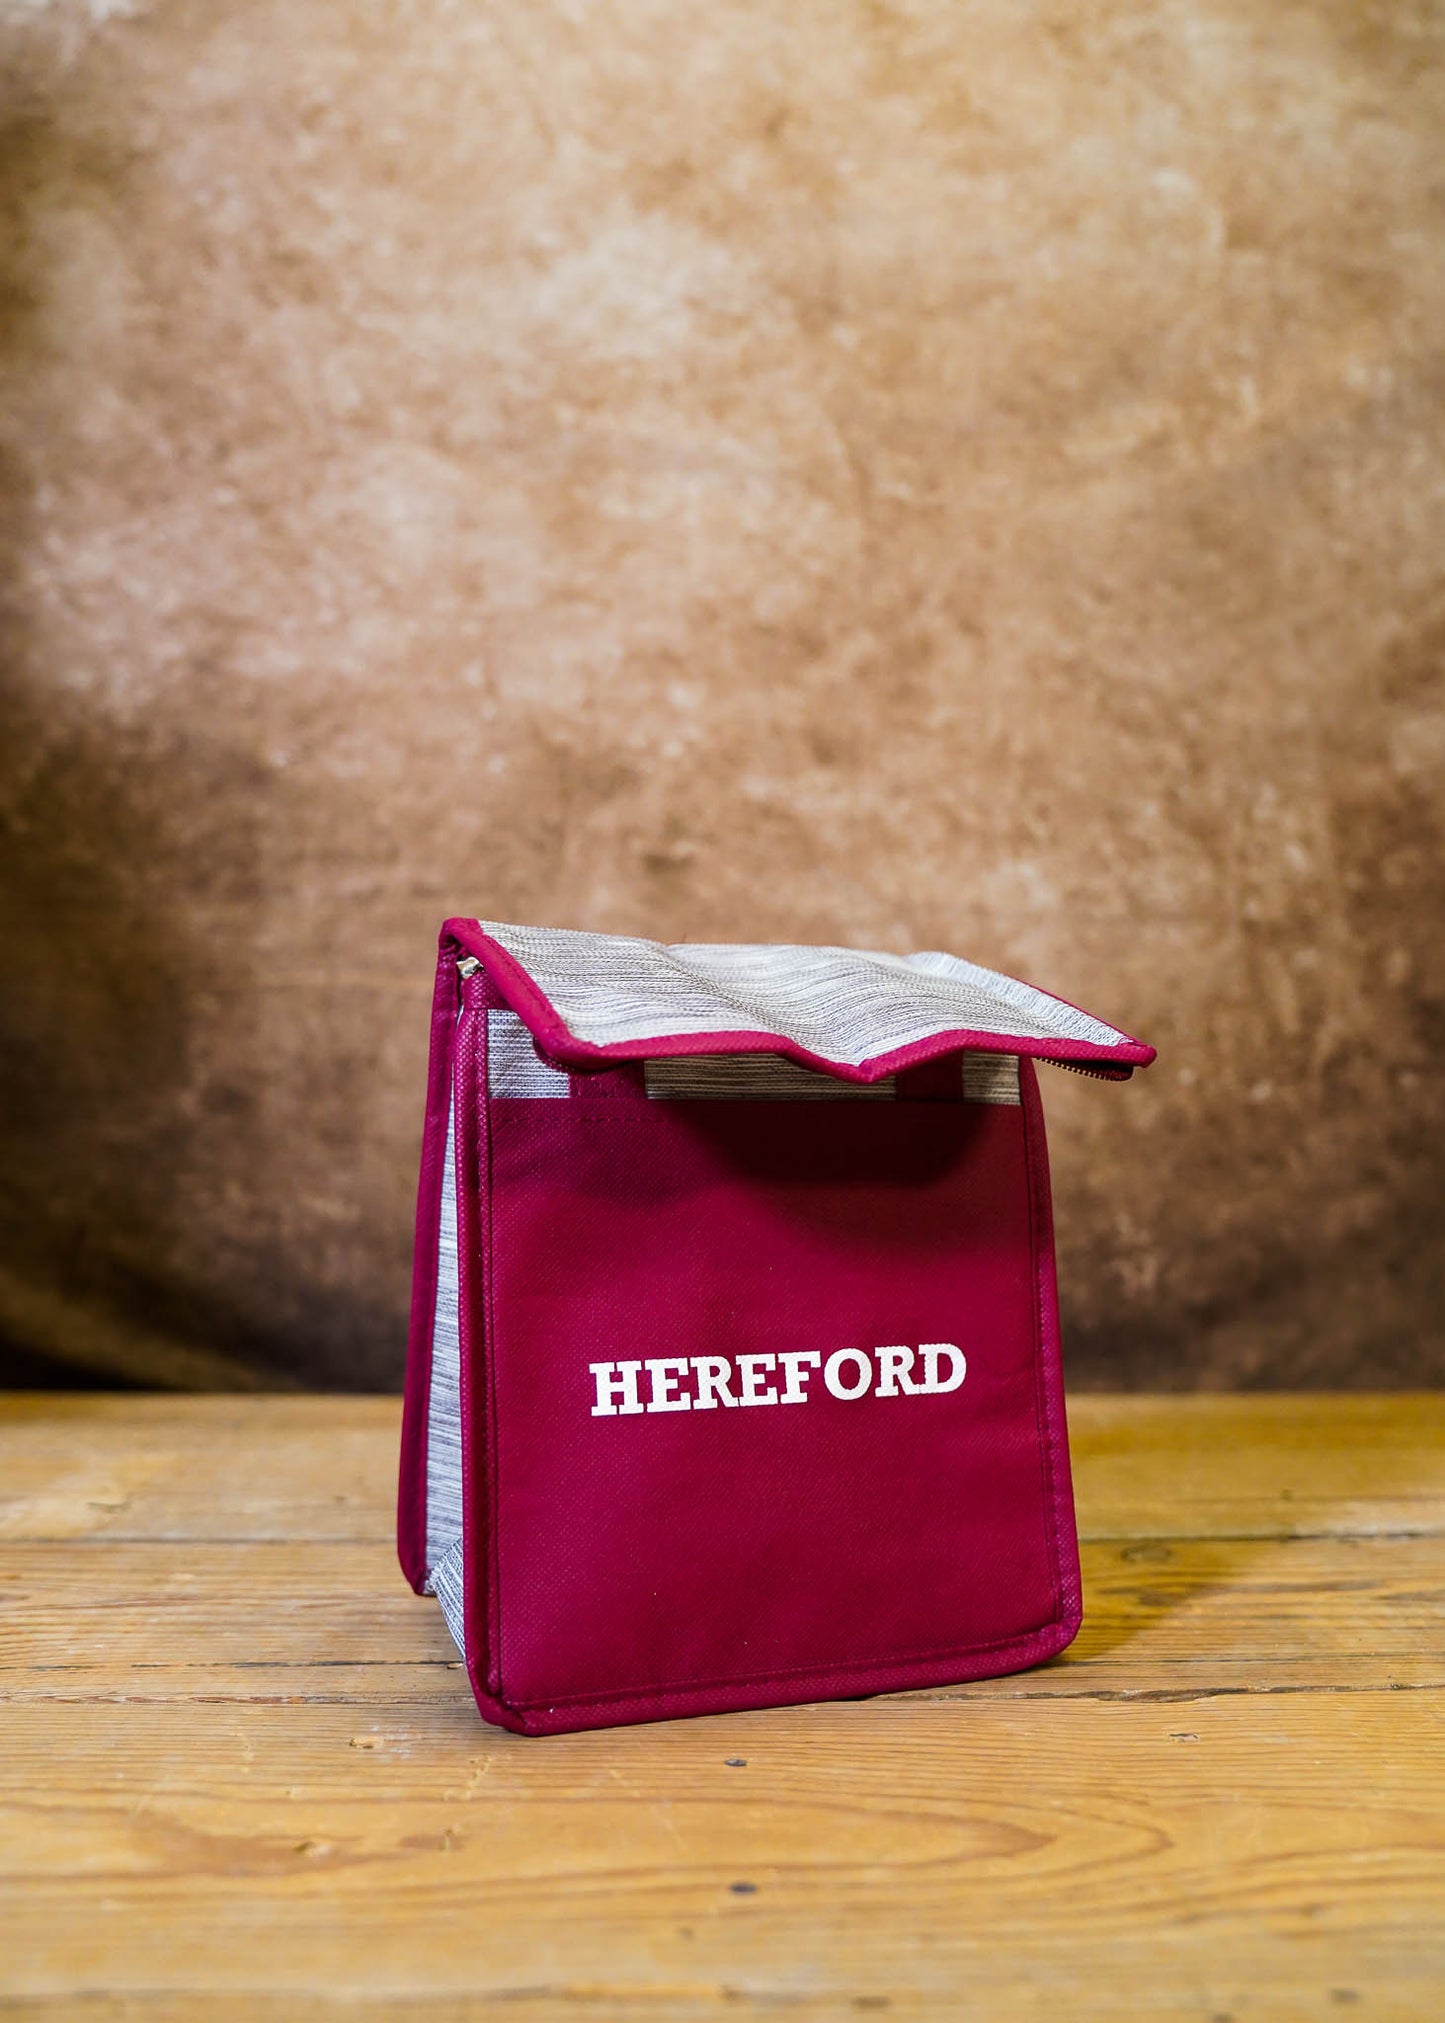 Hereford Lunch Cooler